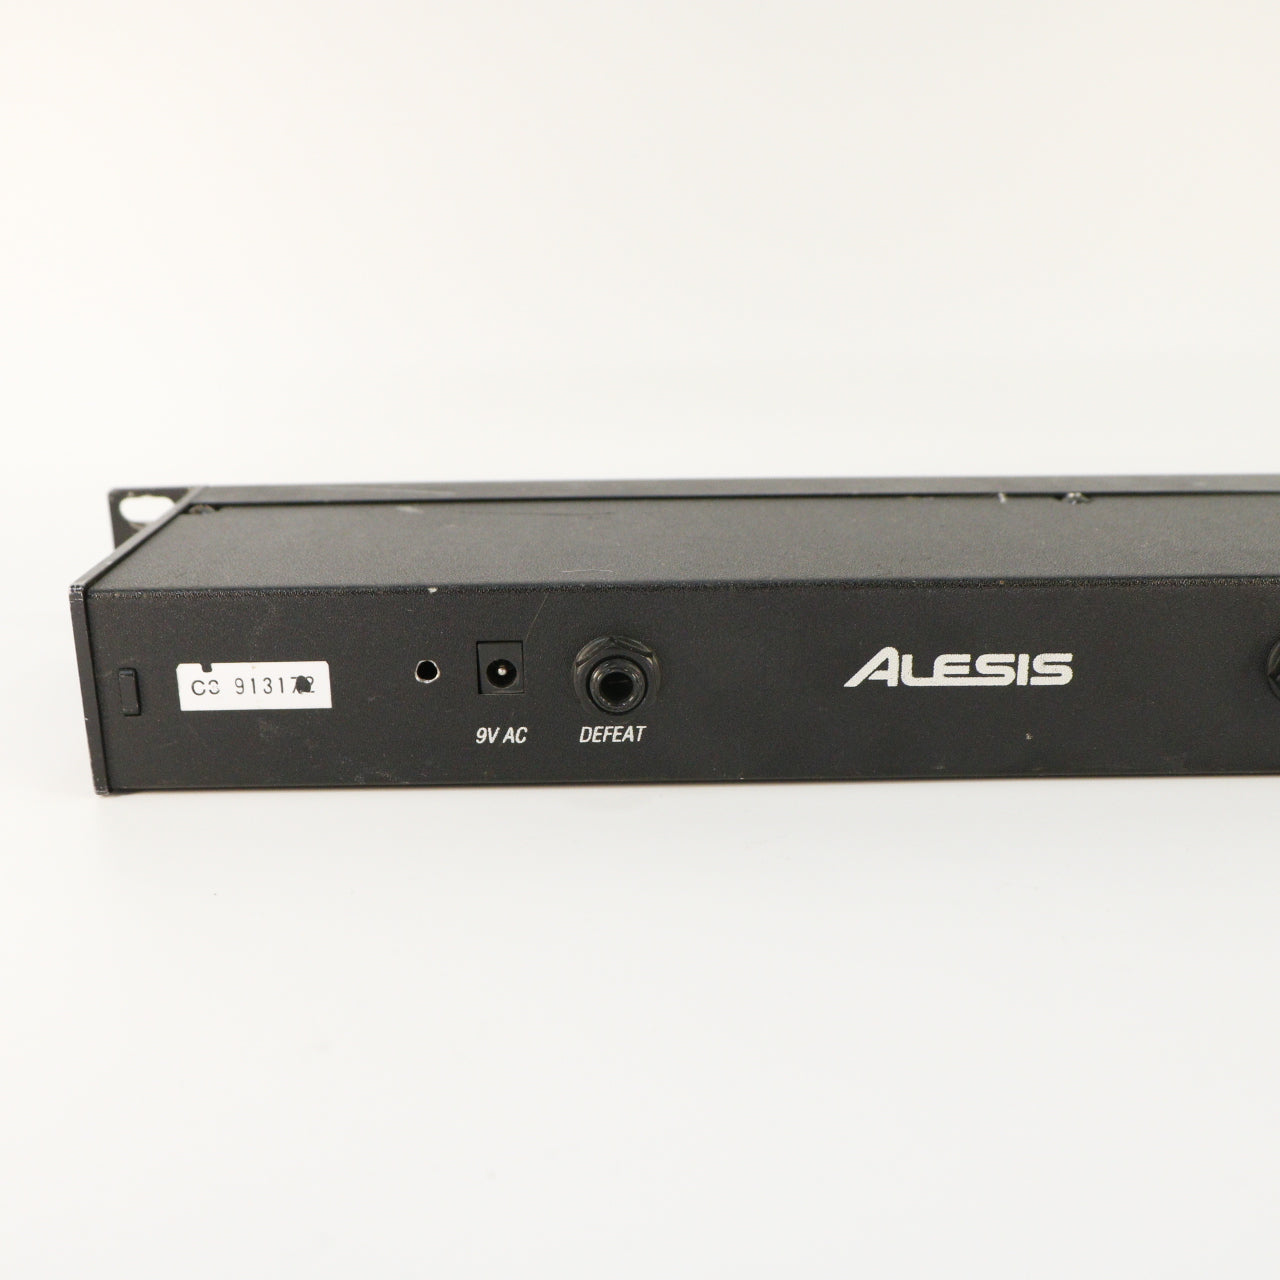 Alesis Microverb III (s/n C3913172, With Adapter)